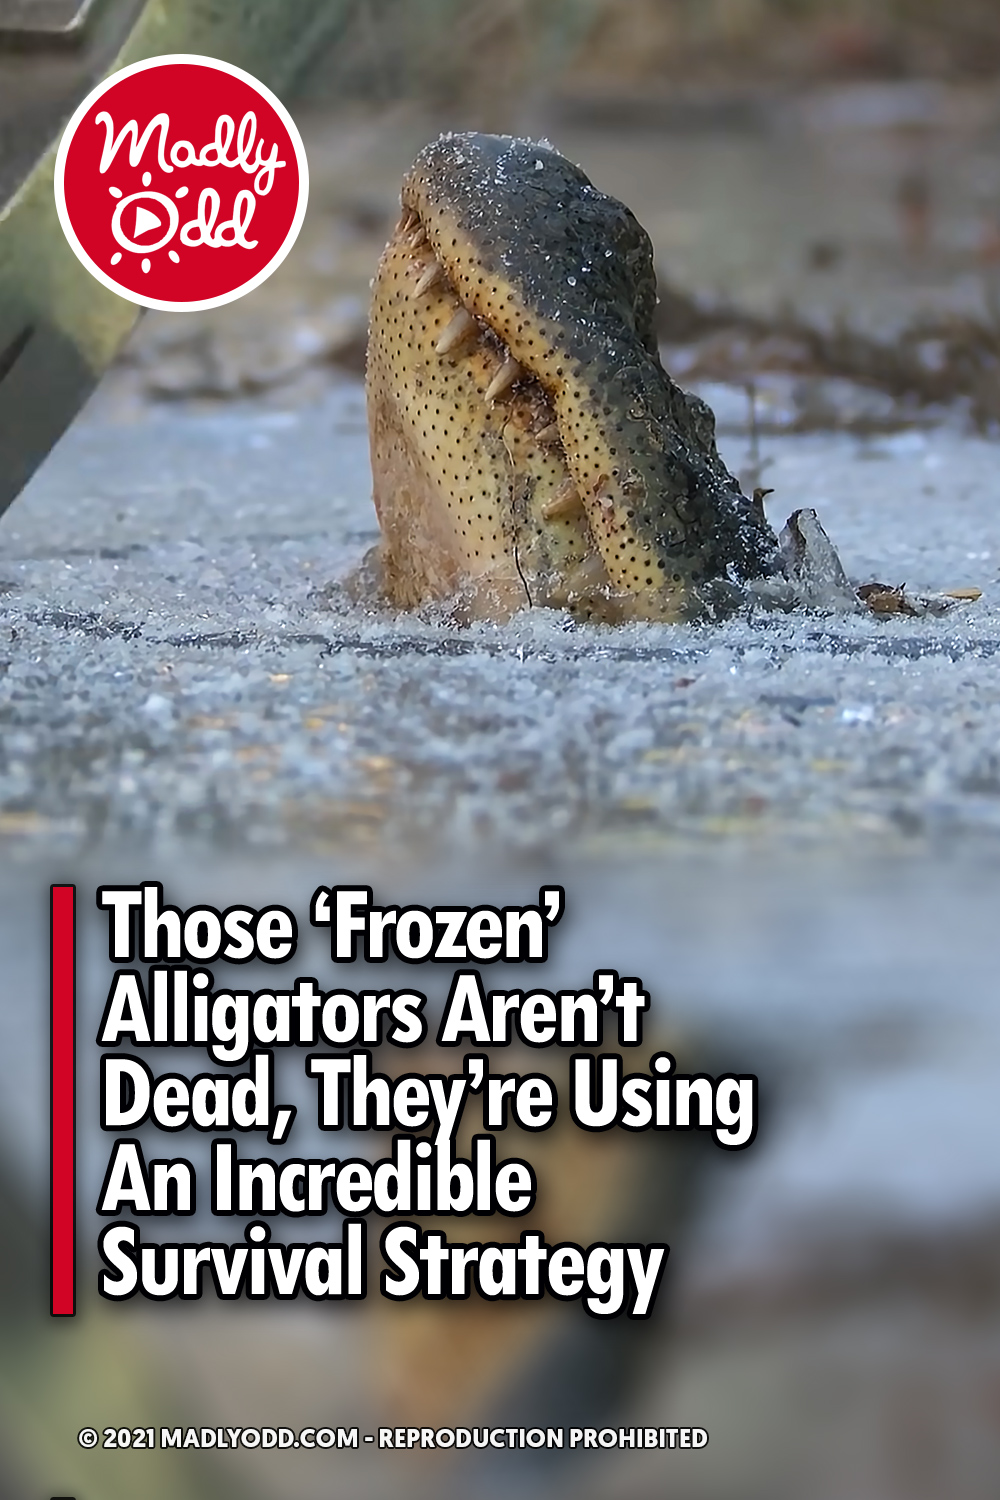 Those \'Frozen\' Alligators Aren\'t Dead, They\'re Using An Incredible Survival Strategy